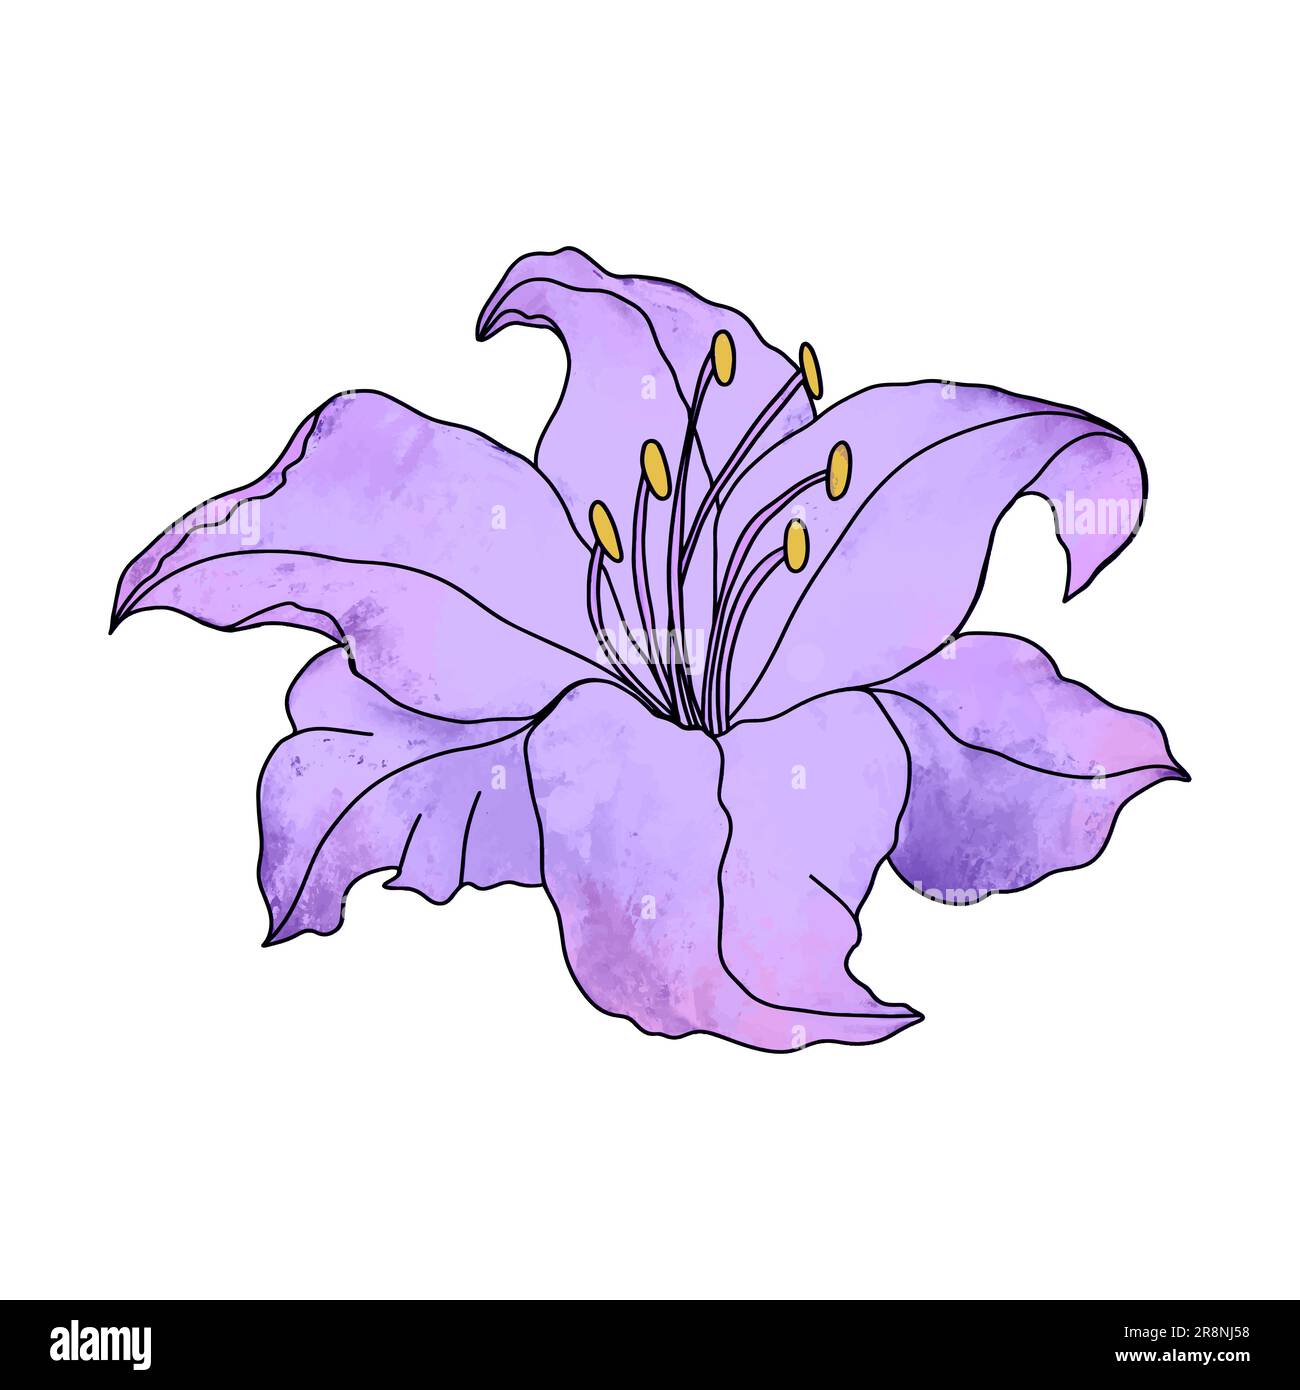 Lily flower hand drawn design, floral vector element isolate on white background Stock Vector